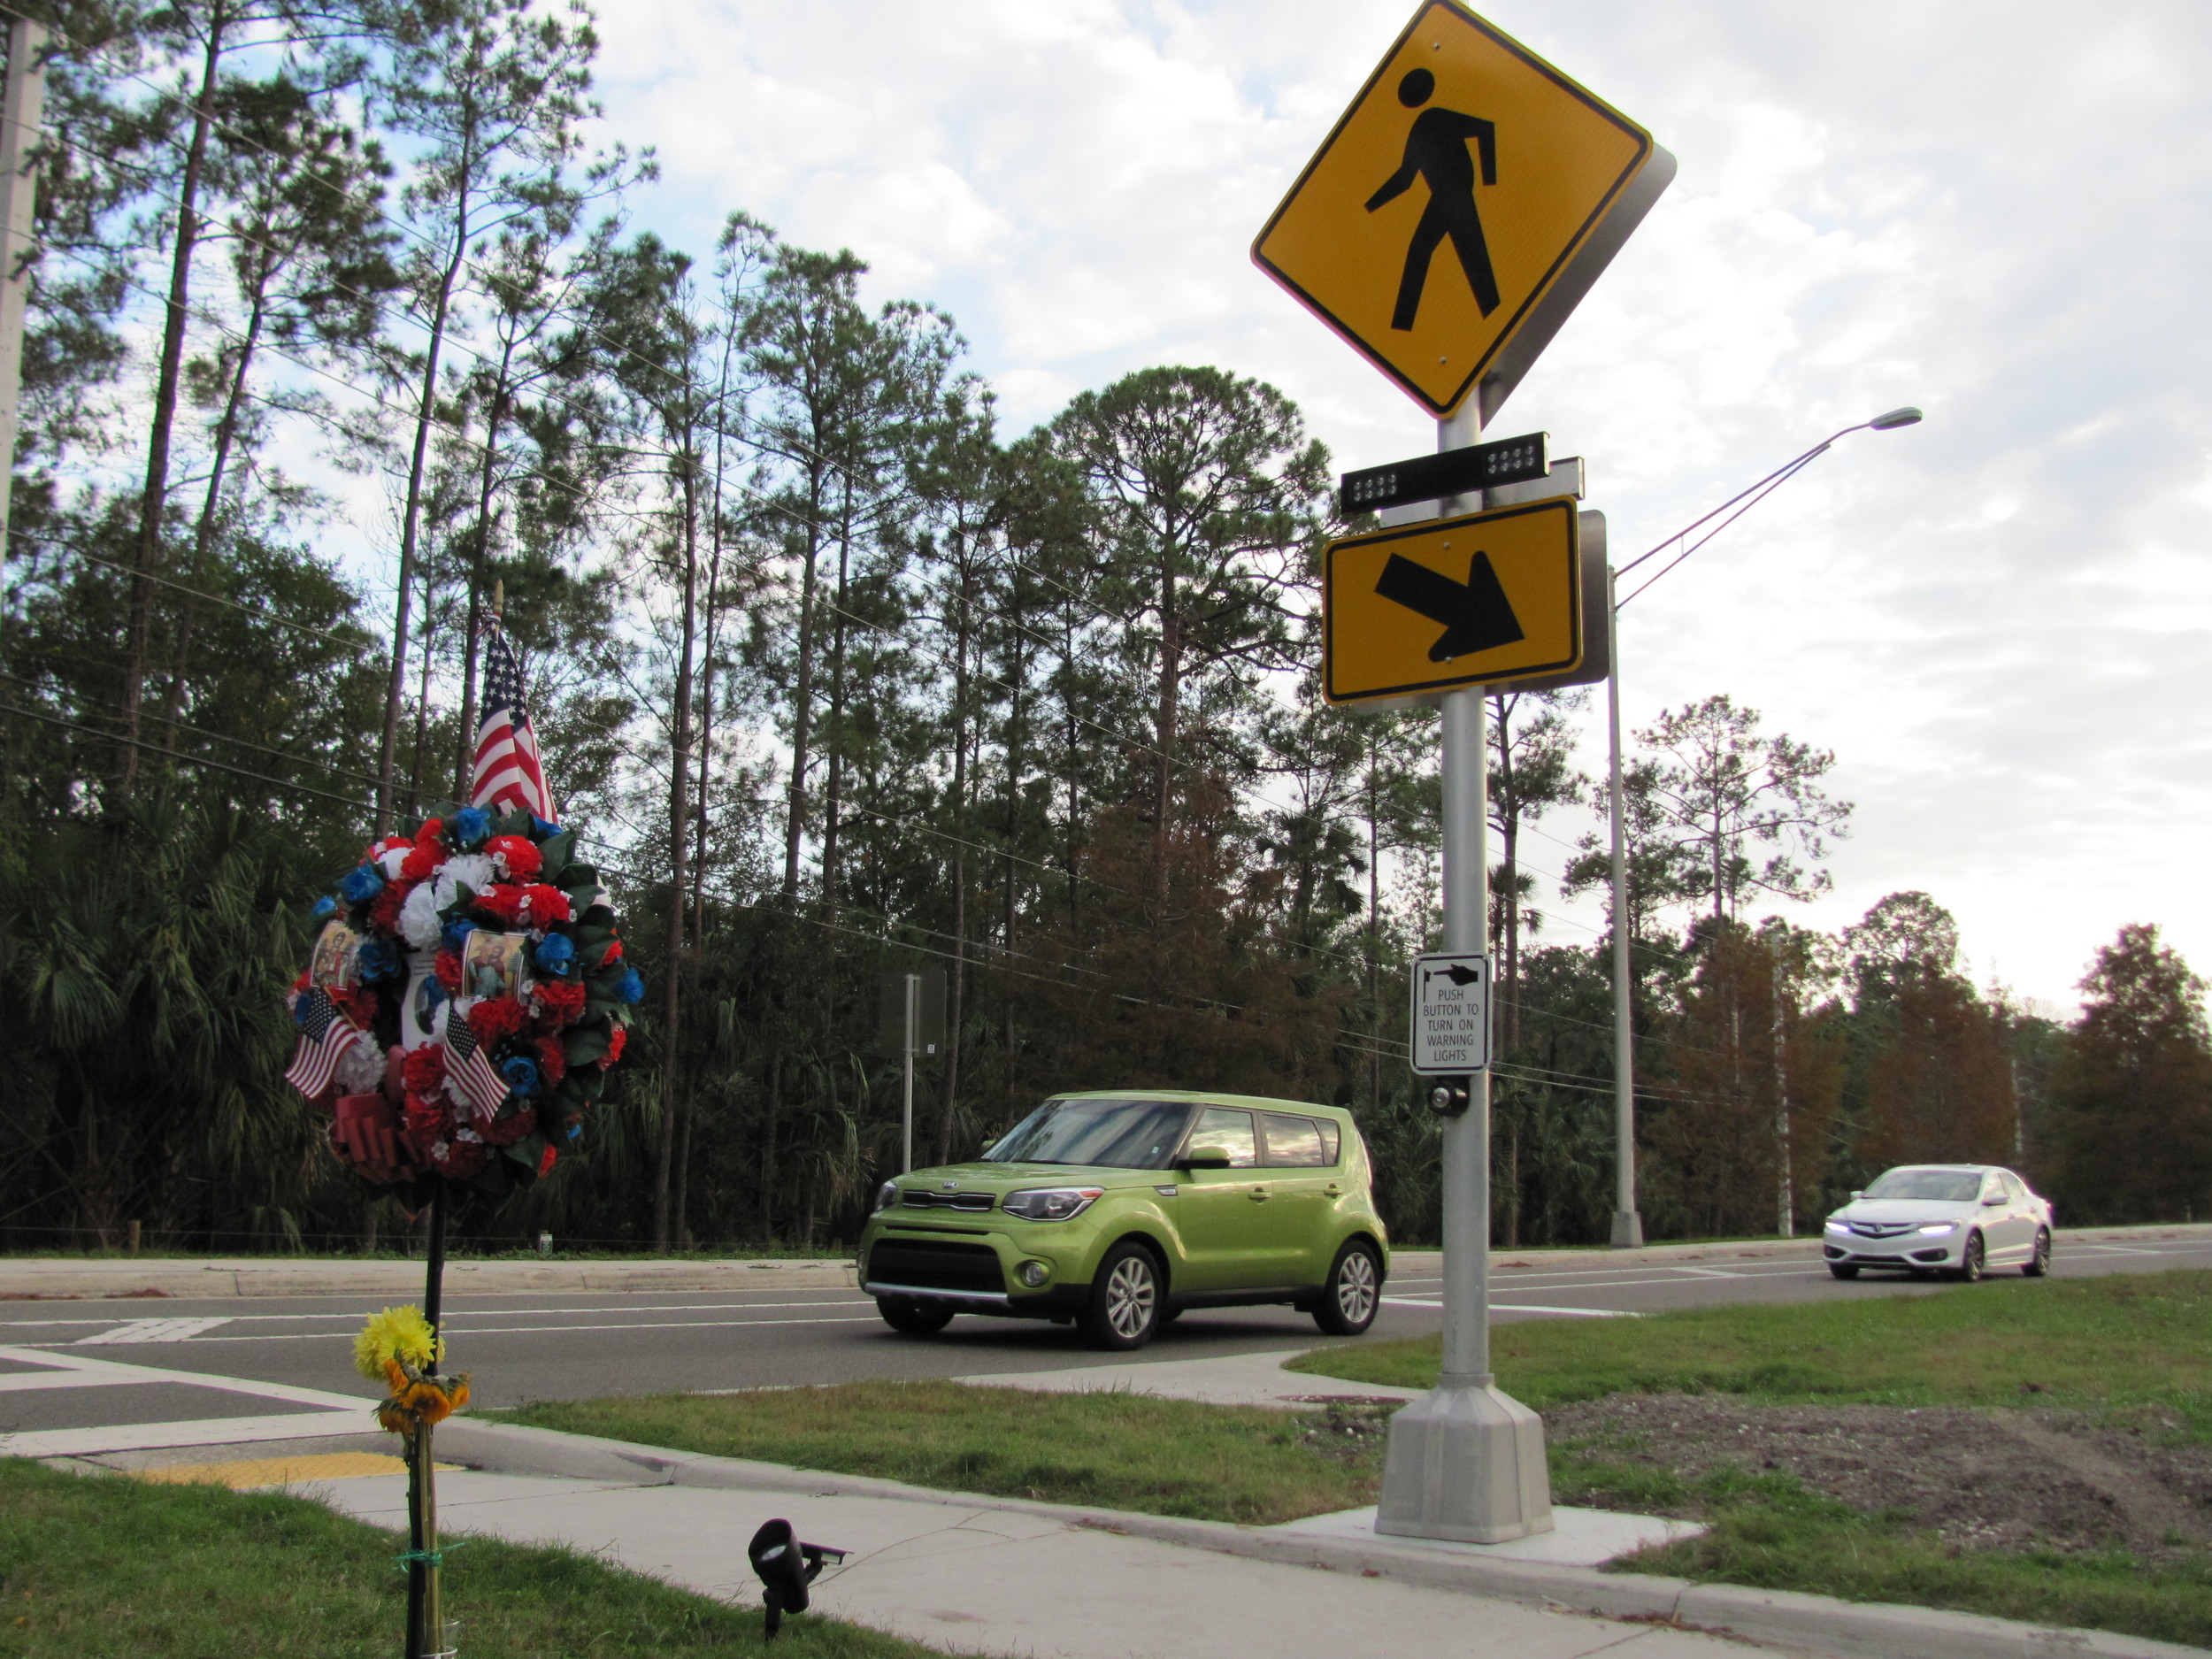 When pedestrians now cross the street at the foot of the Palm Valley Bridge, they can alert motorists by pressing a button that activates flashing signals on the crosswalk signs.